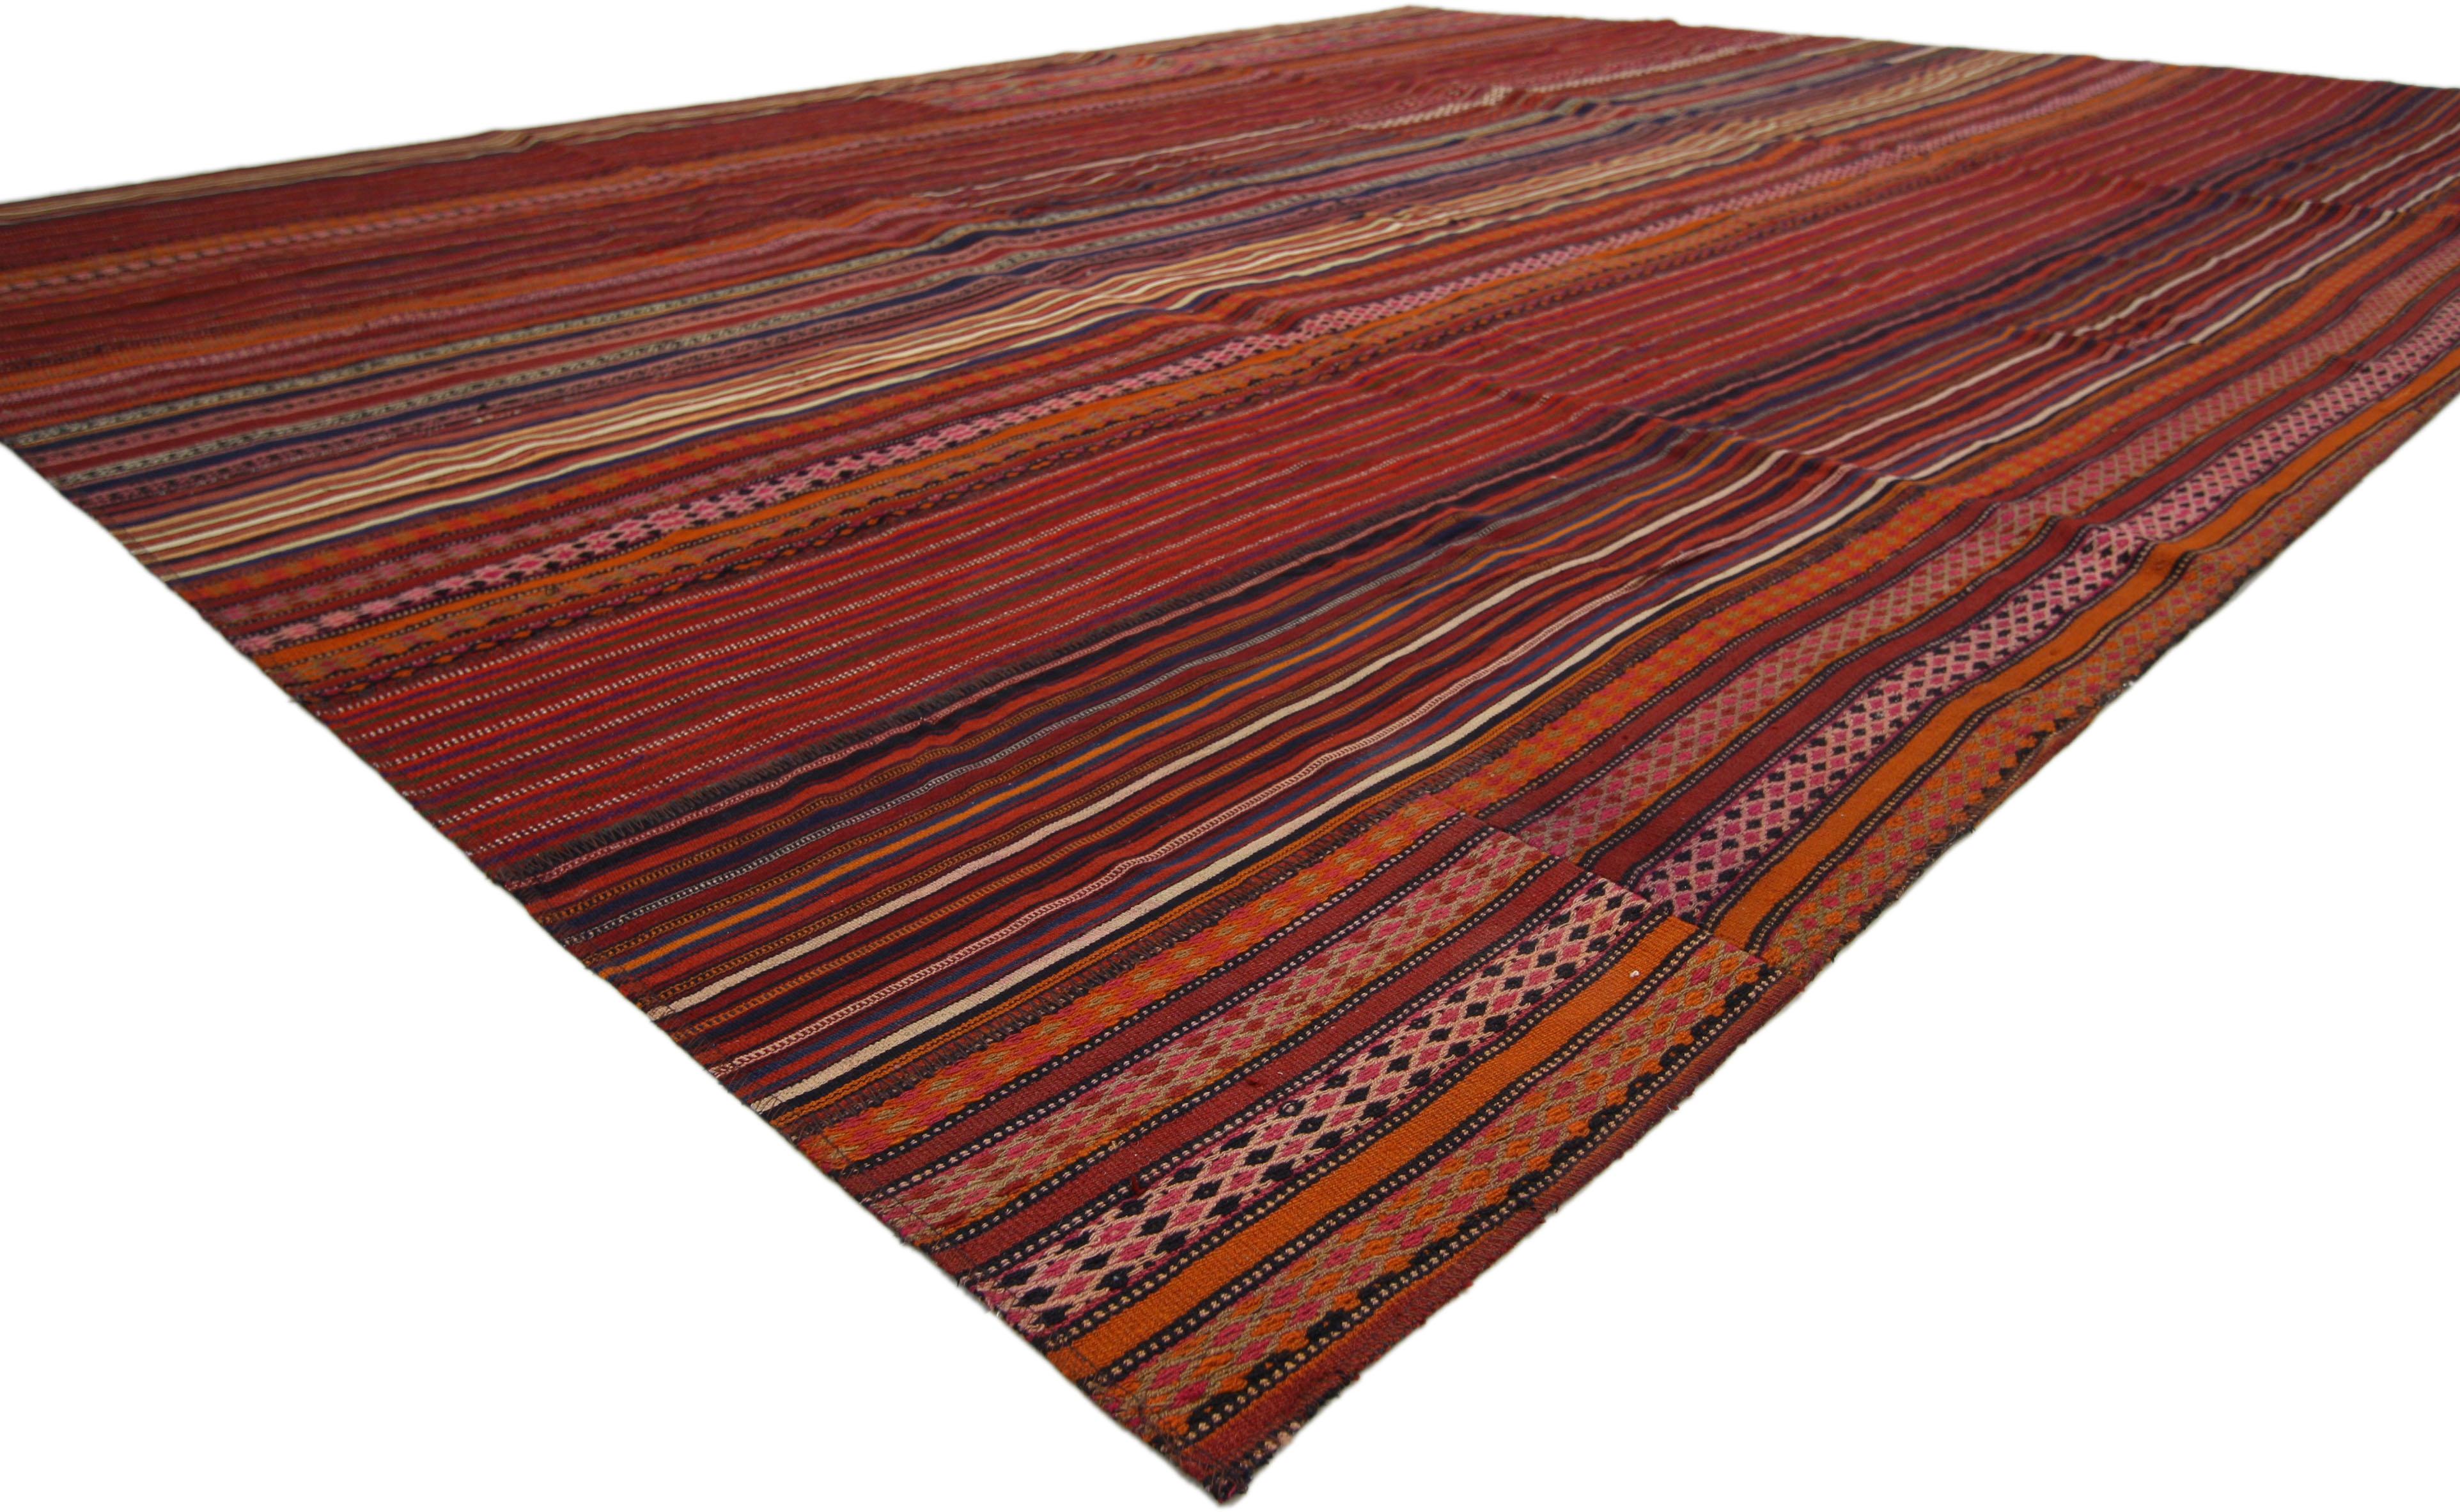 60808, modern style vintage Turkish Jajim Kilim flat-weave rug with colorful stripes. This handwoven wool vintage Turkish Kilim Jajim Kilim rug features a variety of colorful stripes composed of both wide and narrow bands forming a captivating